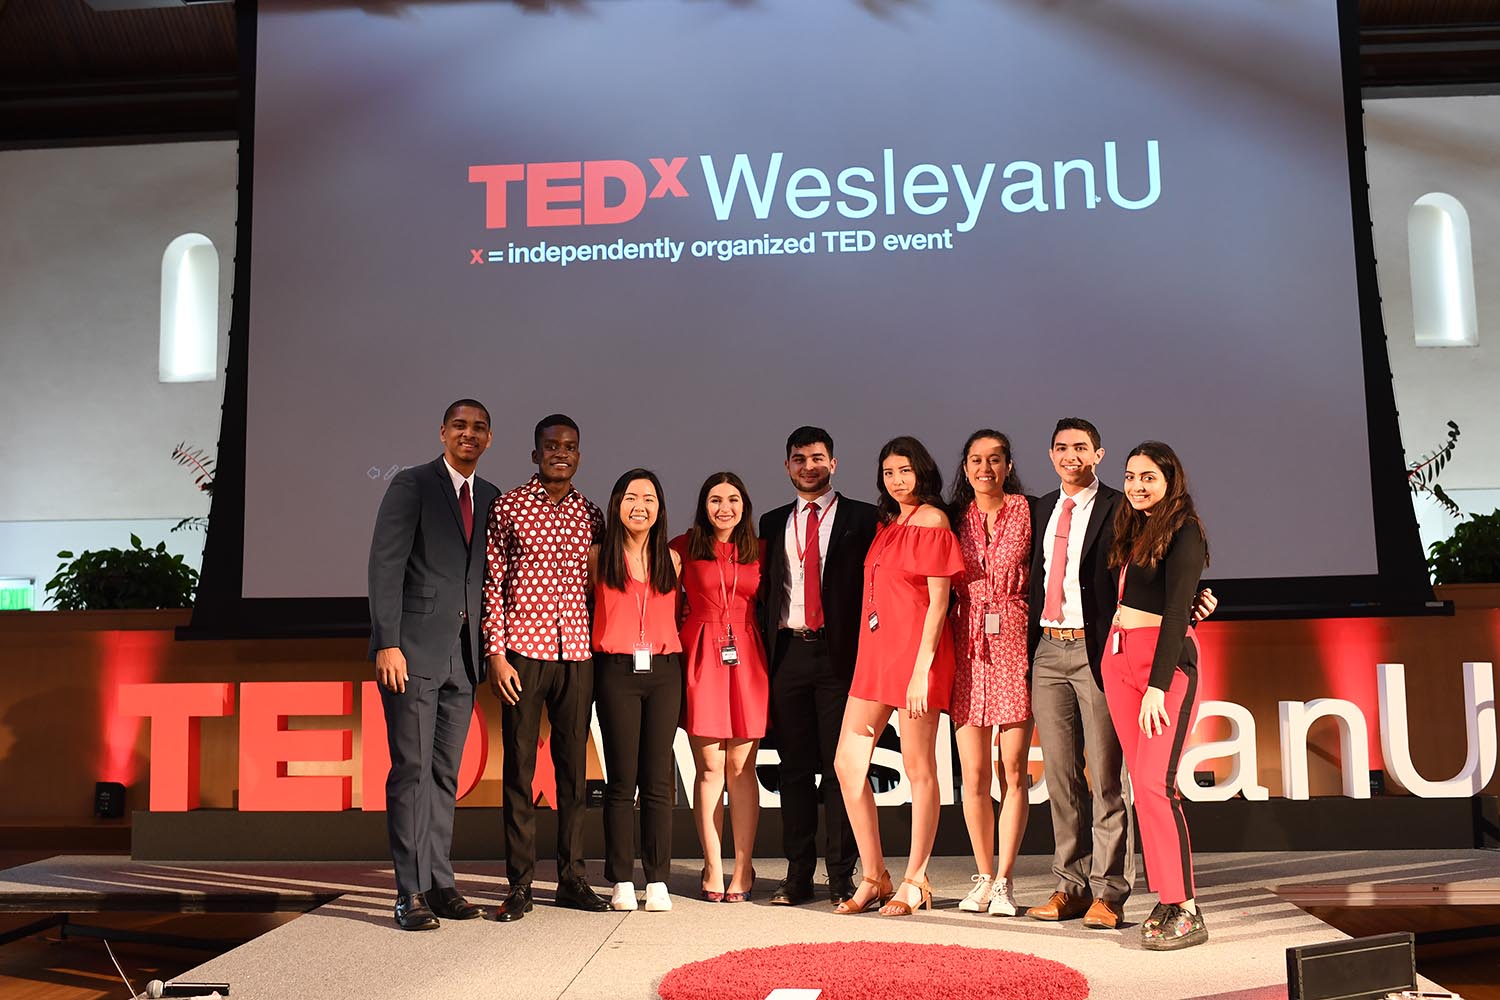 Members of the 2019 TEDxWesleyanU team gathered on the TEDx stage in Beckham Hall following the successful conference. Tickets for the event sold out within 12 hours.